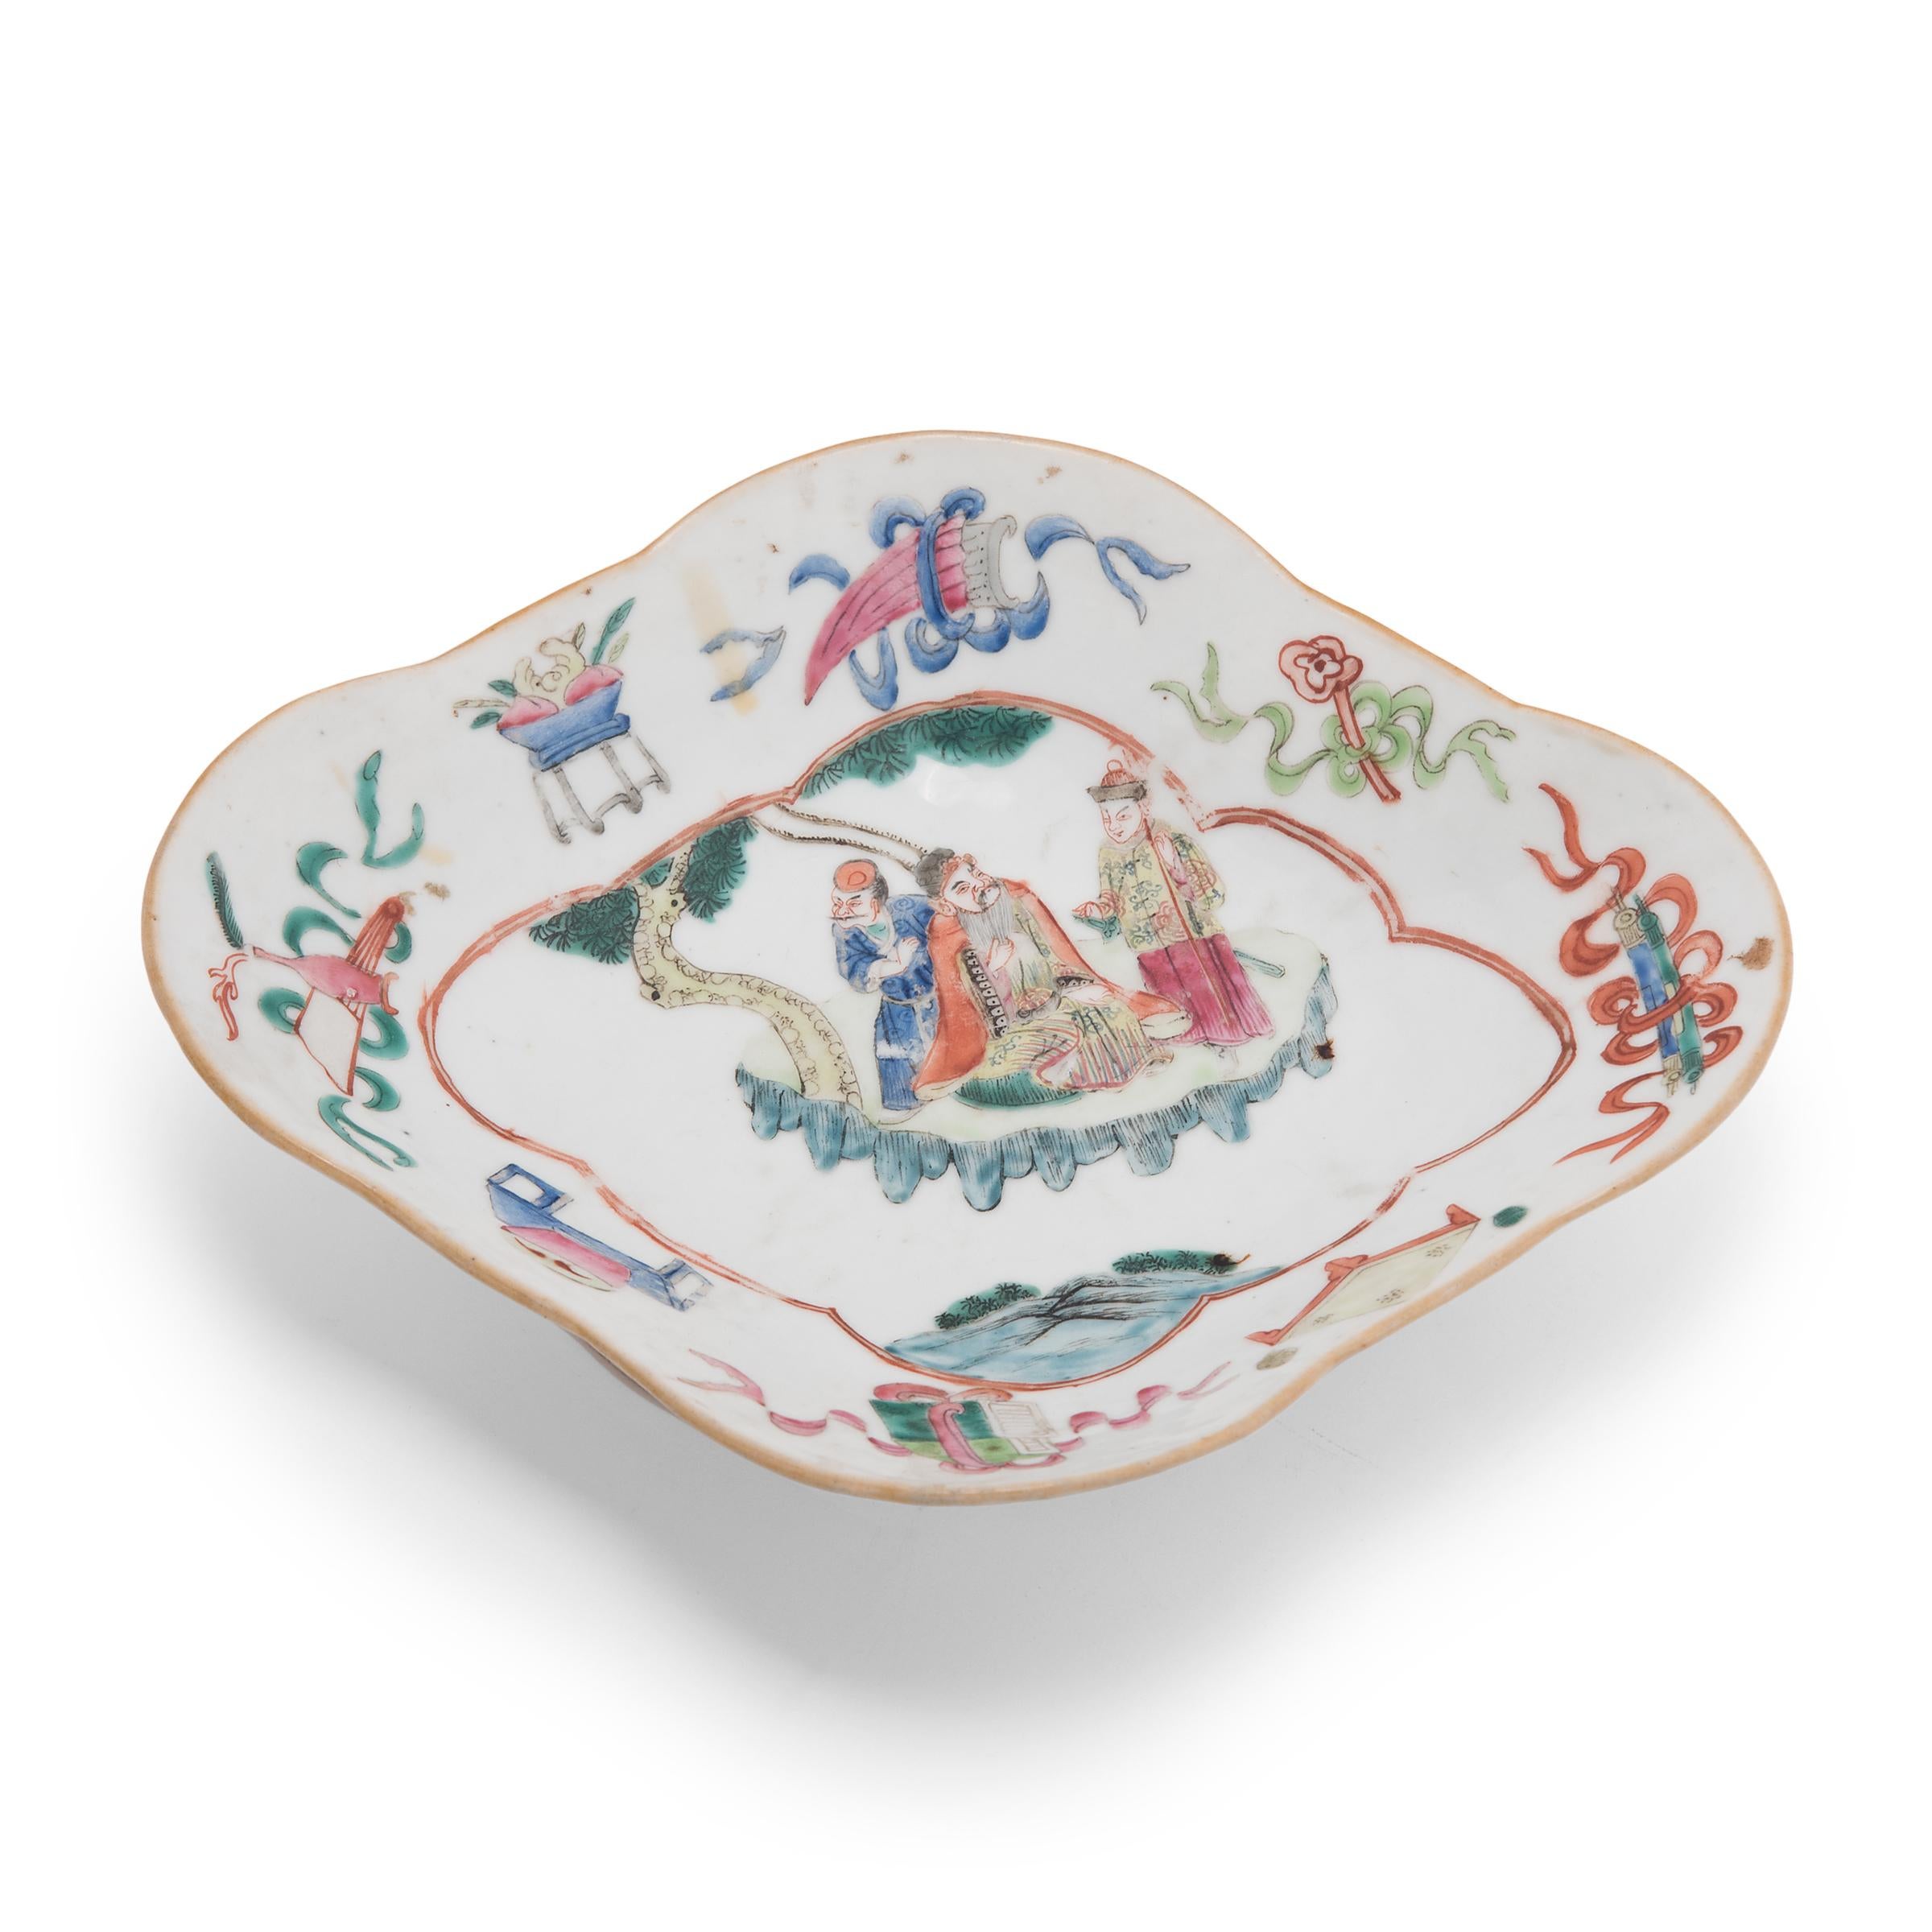 This colorful porcelain bowl dates to the mid-19th century and was originally used as a serving dish for ritual offerings, placed before a home altar and piled high with fruit, baked goods, and other foods. The dish has a shallow cartouche-shaped